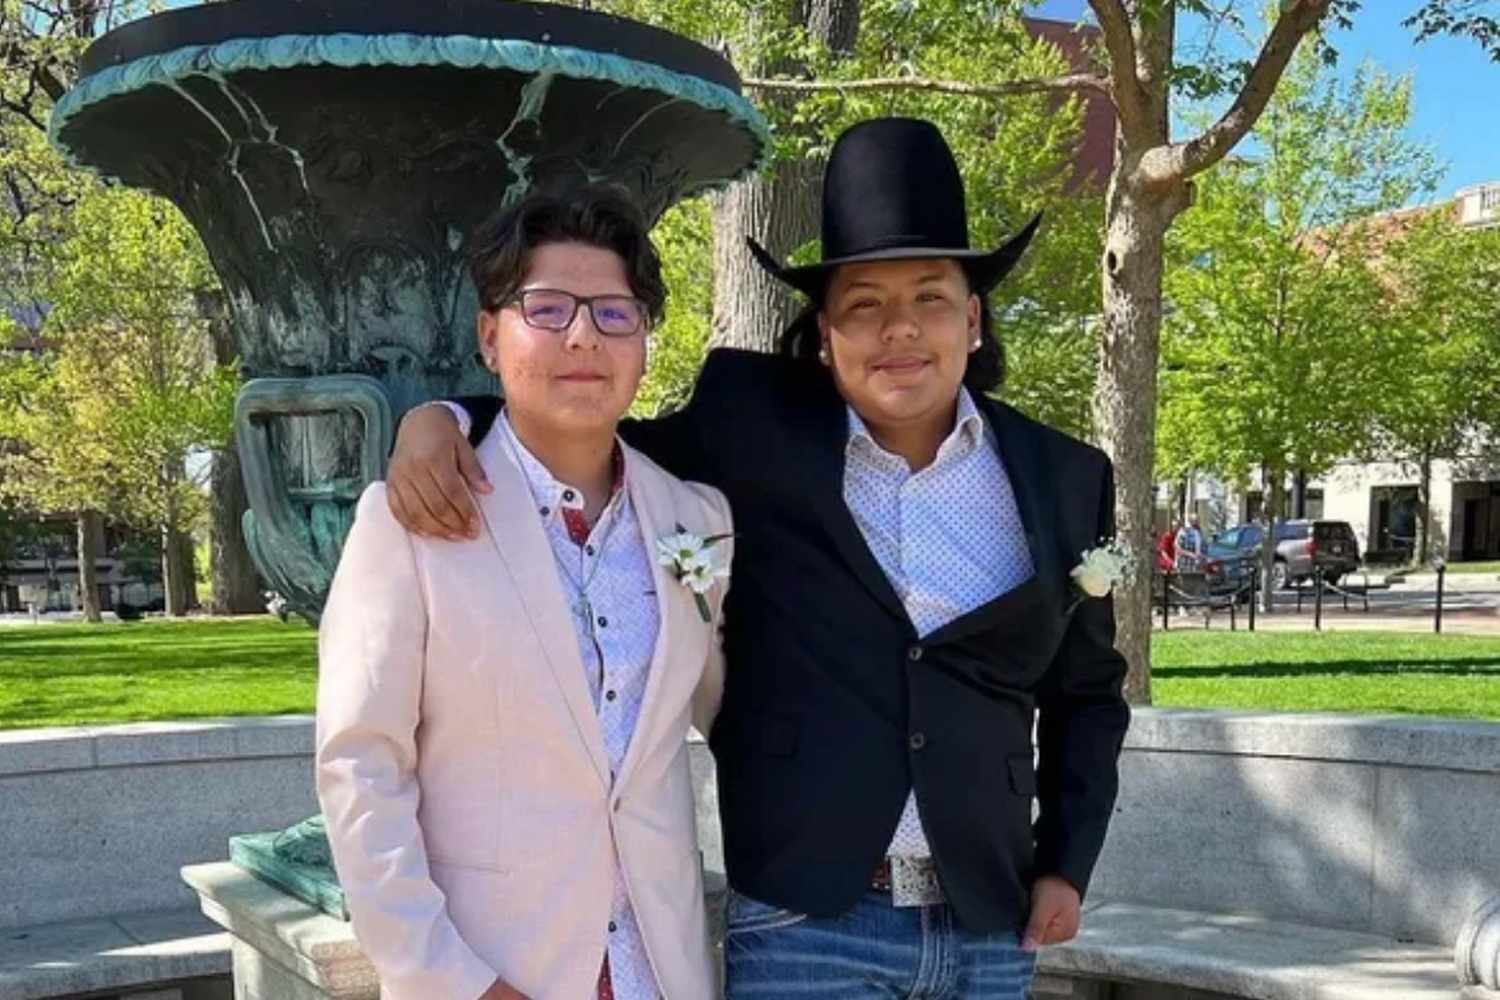 Brothers Among 4 Teens Dead After Early Morning Wisconsin Crash: 'So Much Left to Accomplish'